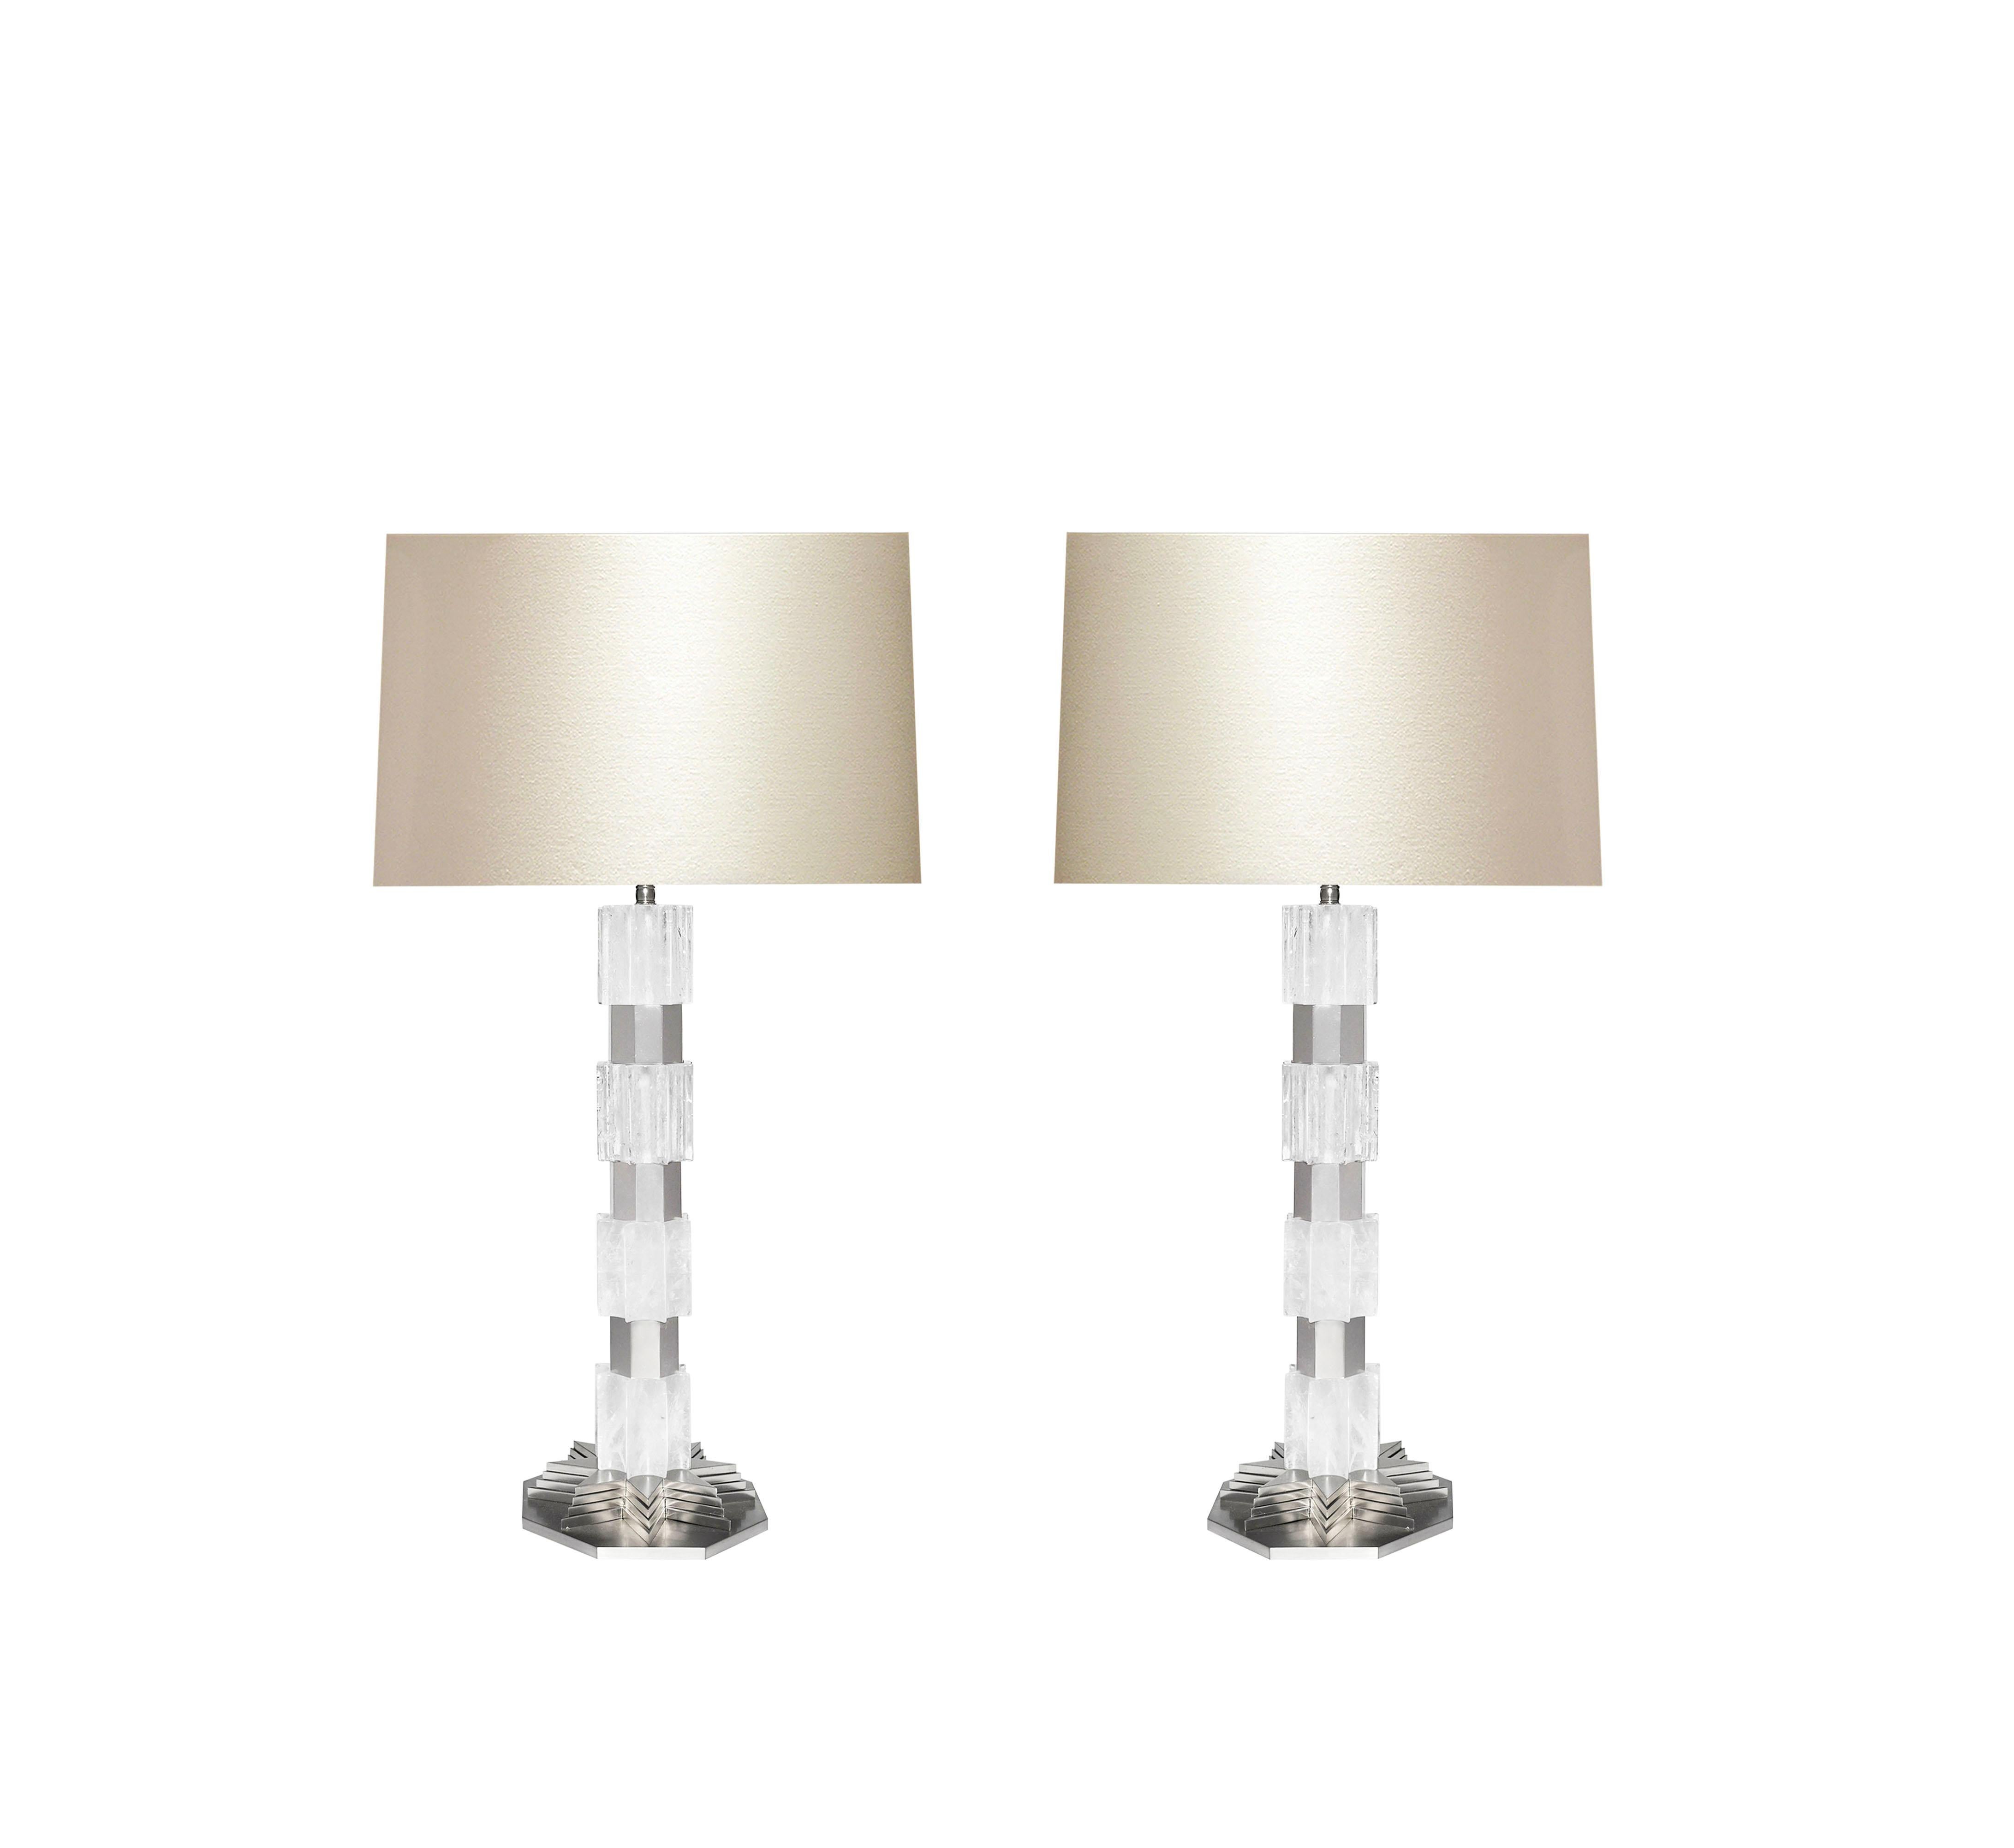 A pair of deco style rock crystal quartz lamps with nickel plating inserts and bases, created by Phoenix Gallery, NYC.
To the rock crystal: 19 in H.
(Lampshade not included).